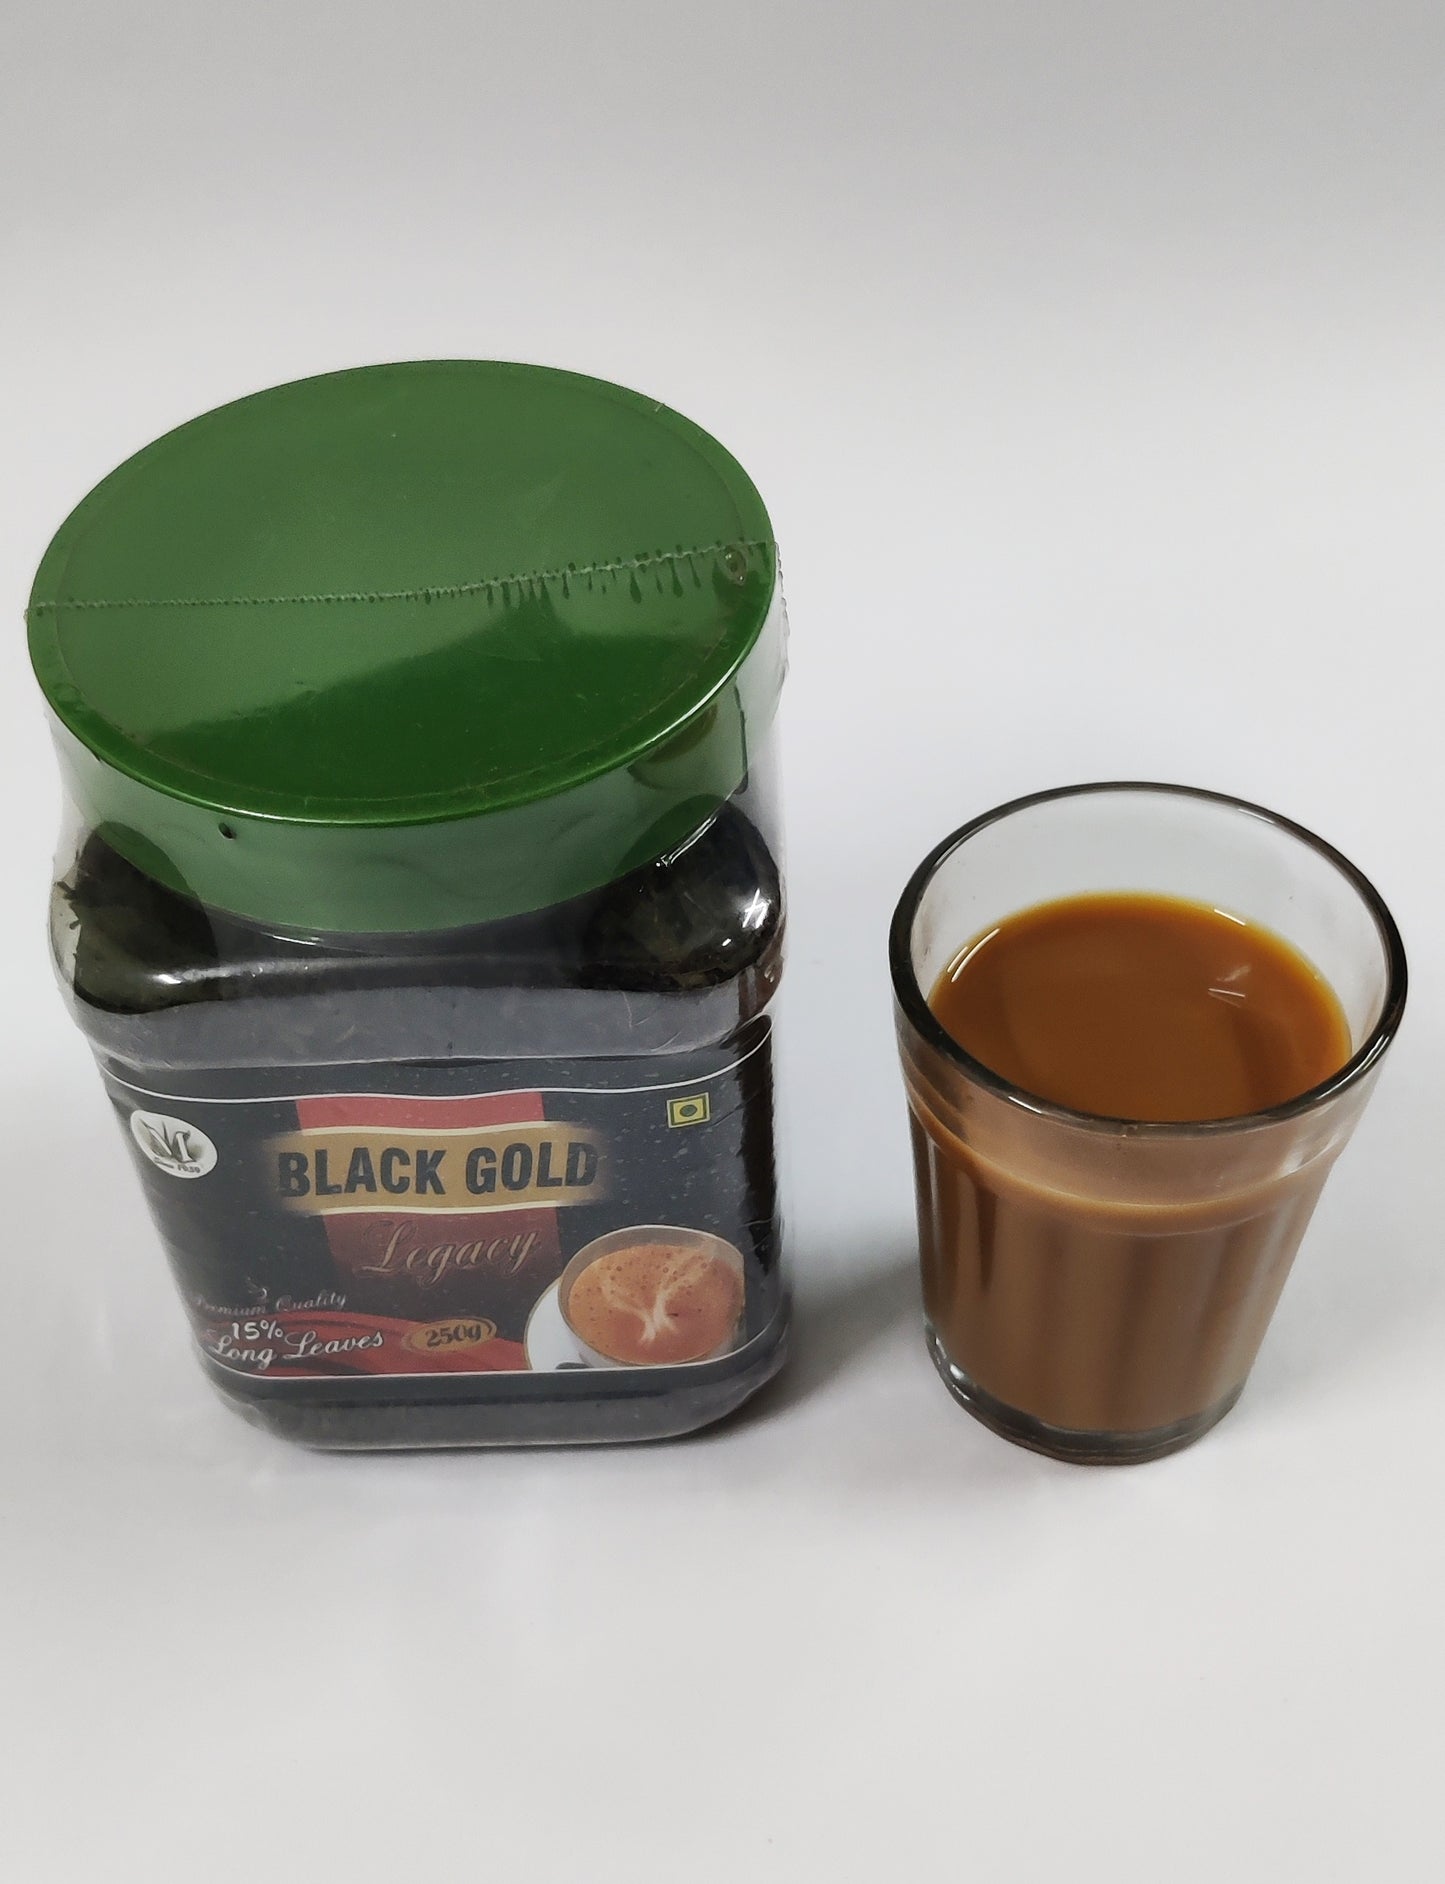 Black Gold Legacy | Premium CTC Tea with guaranteed 15% long leaves | 250gms pack